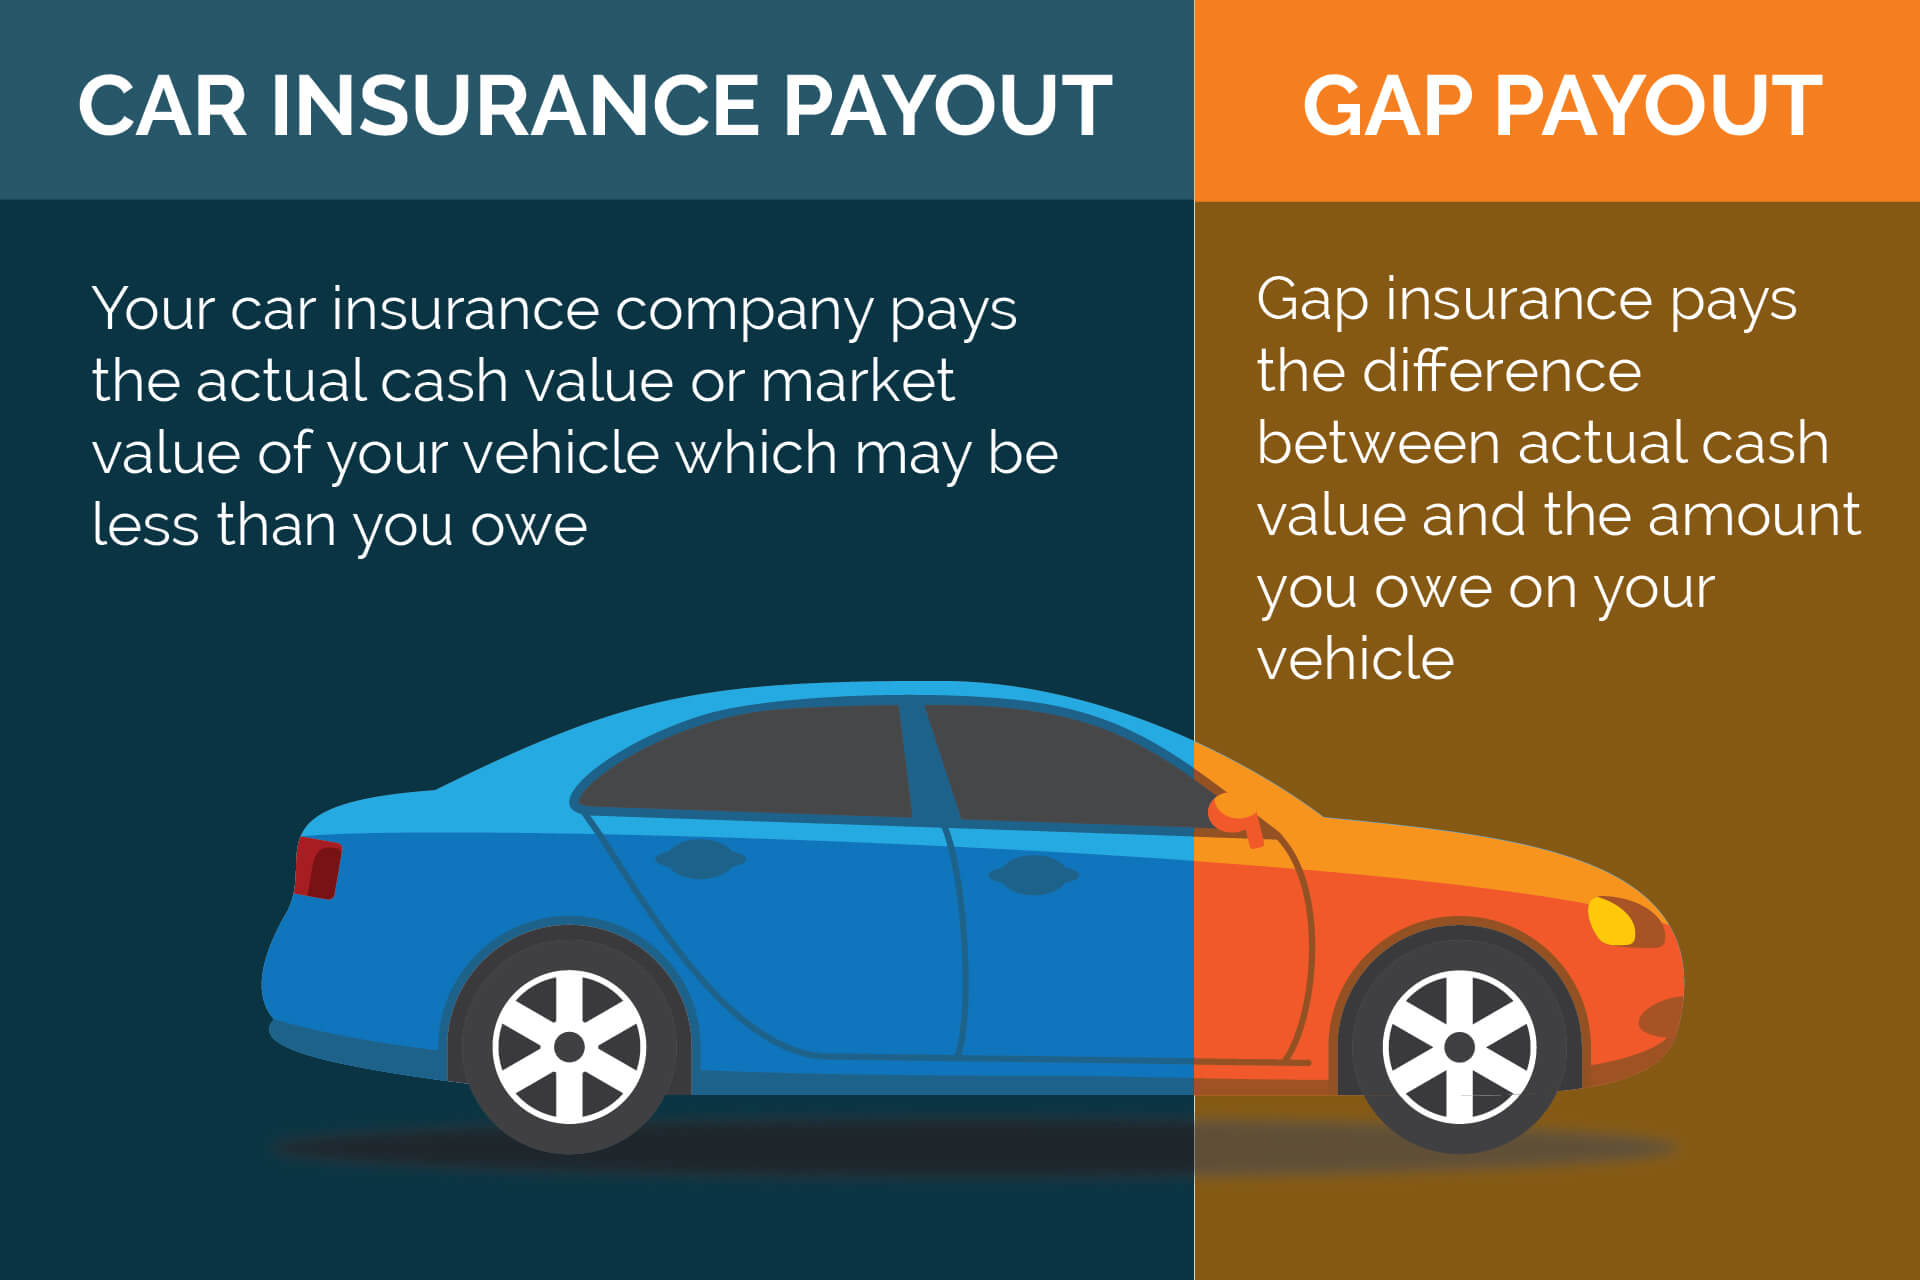 Protect your investment with Gap Insurance